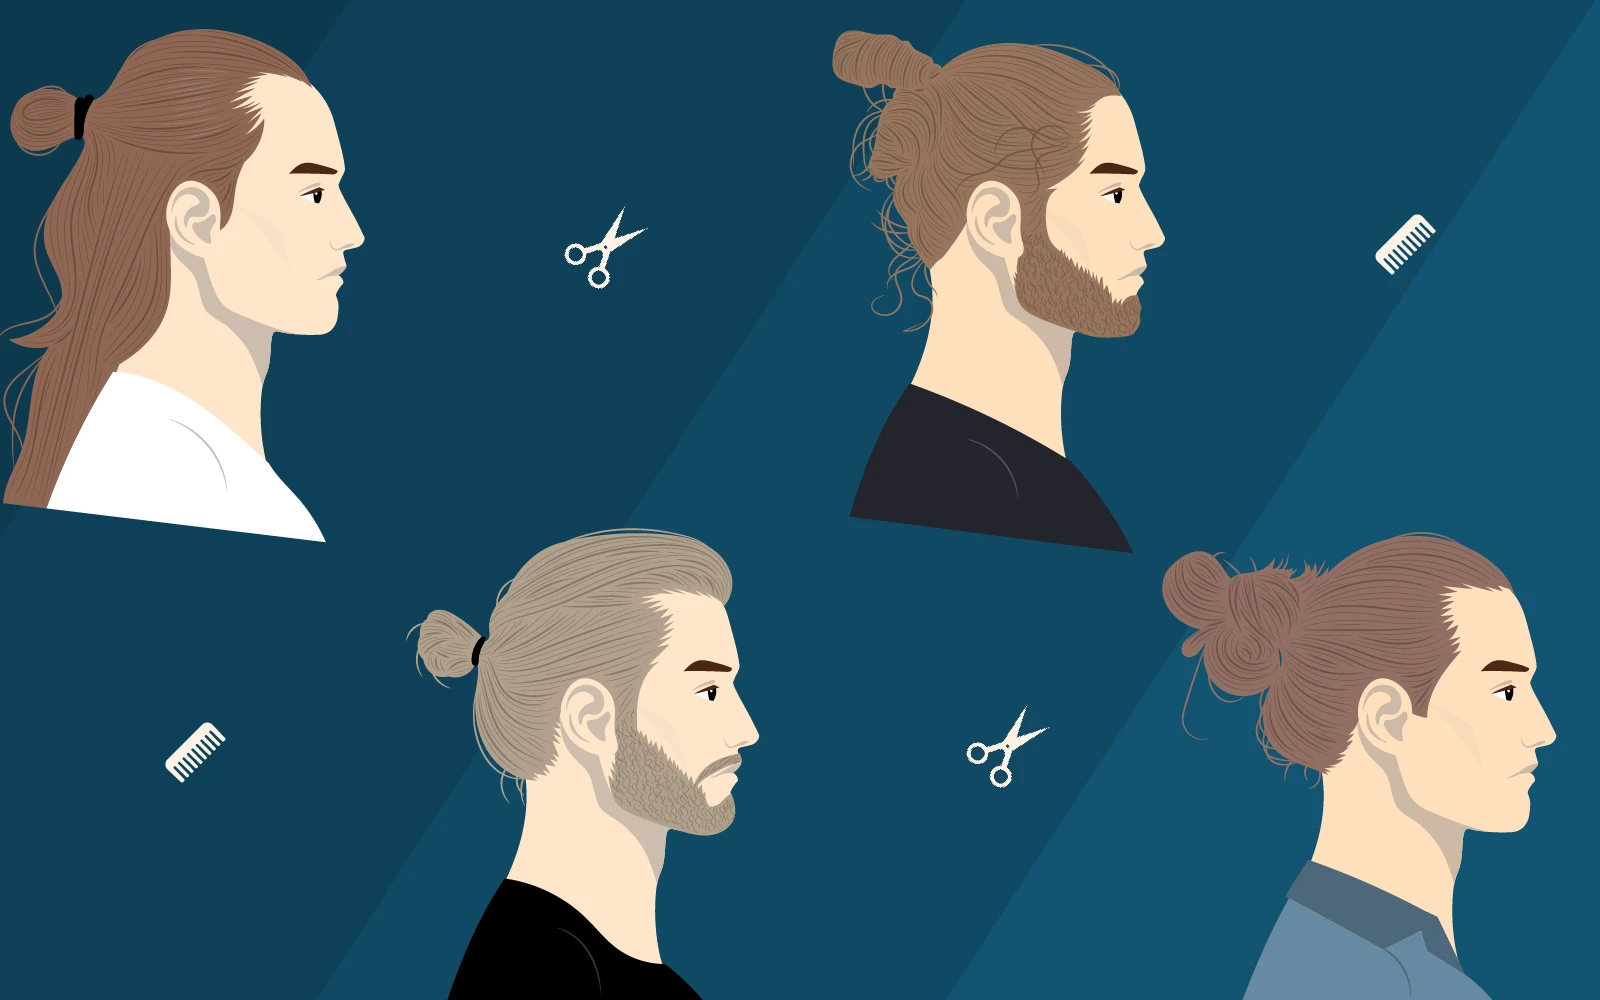 How to Do a Man Bun | 4 Different Ways to Rock the Style